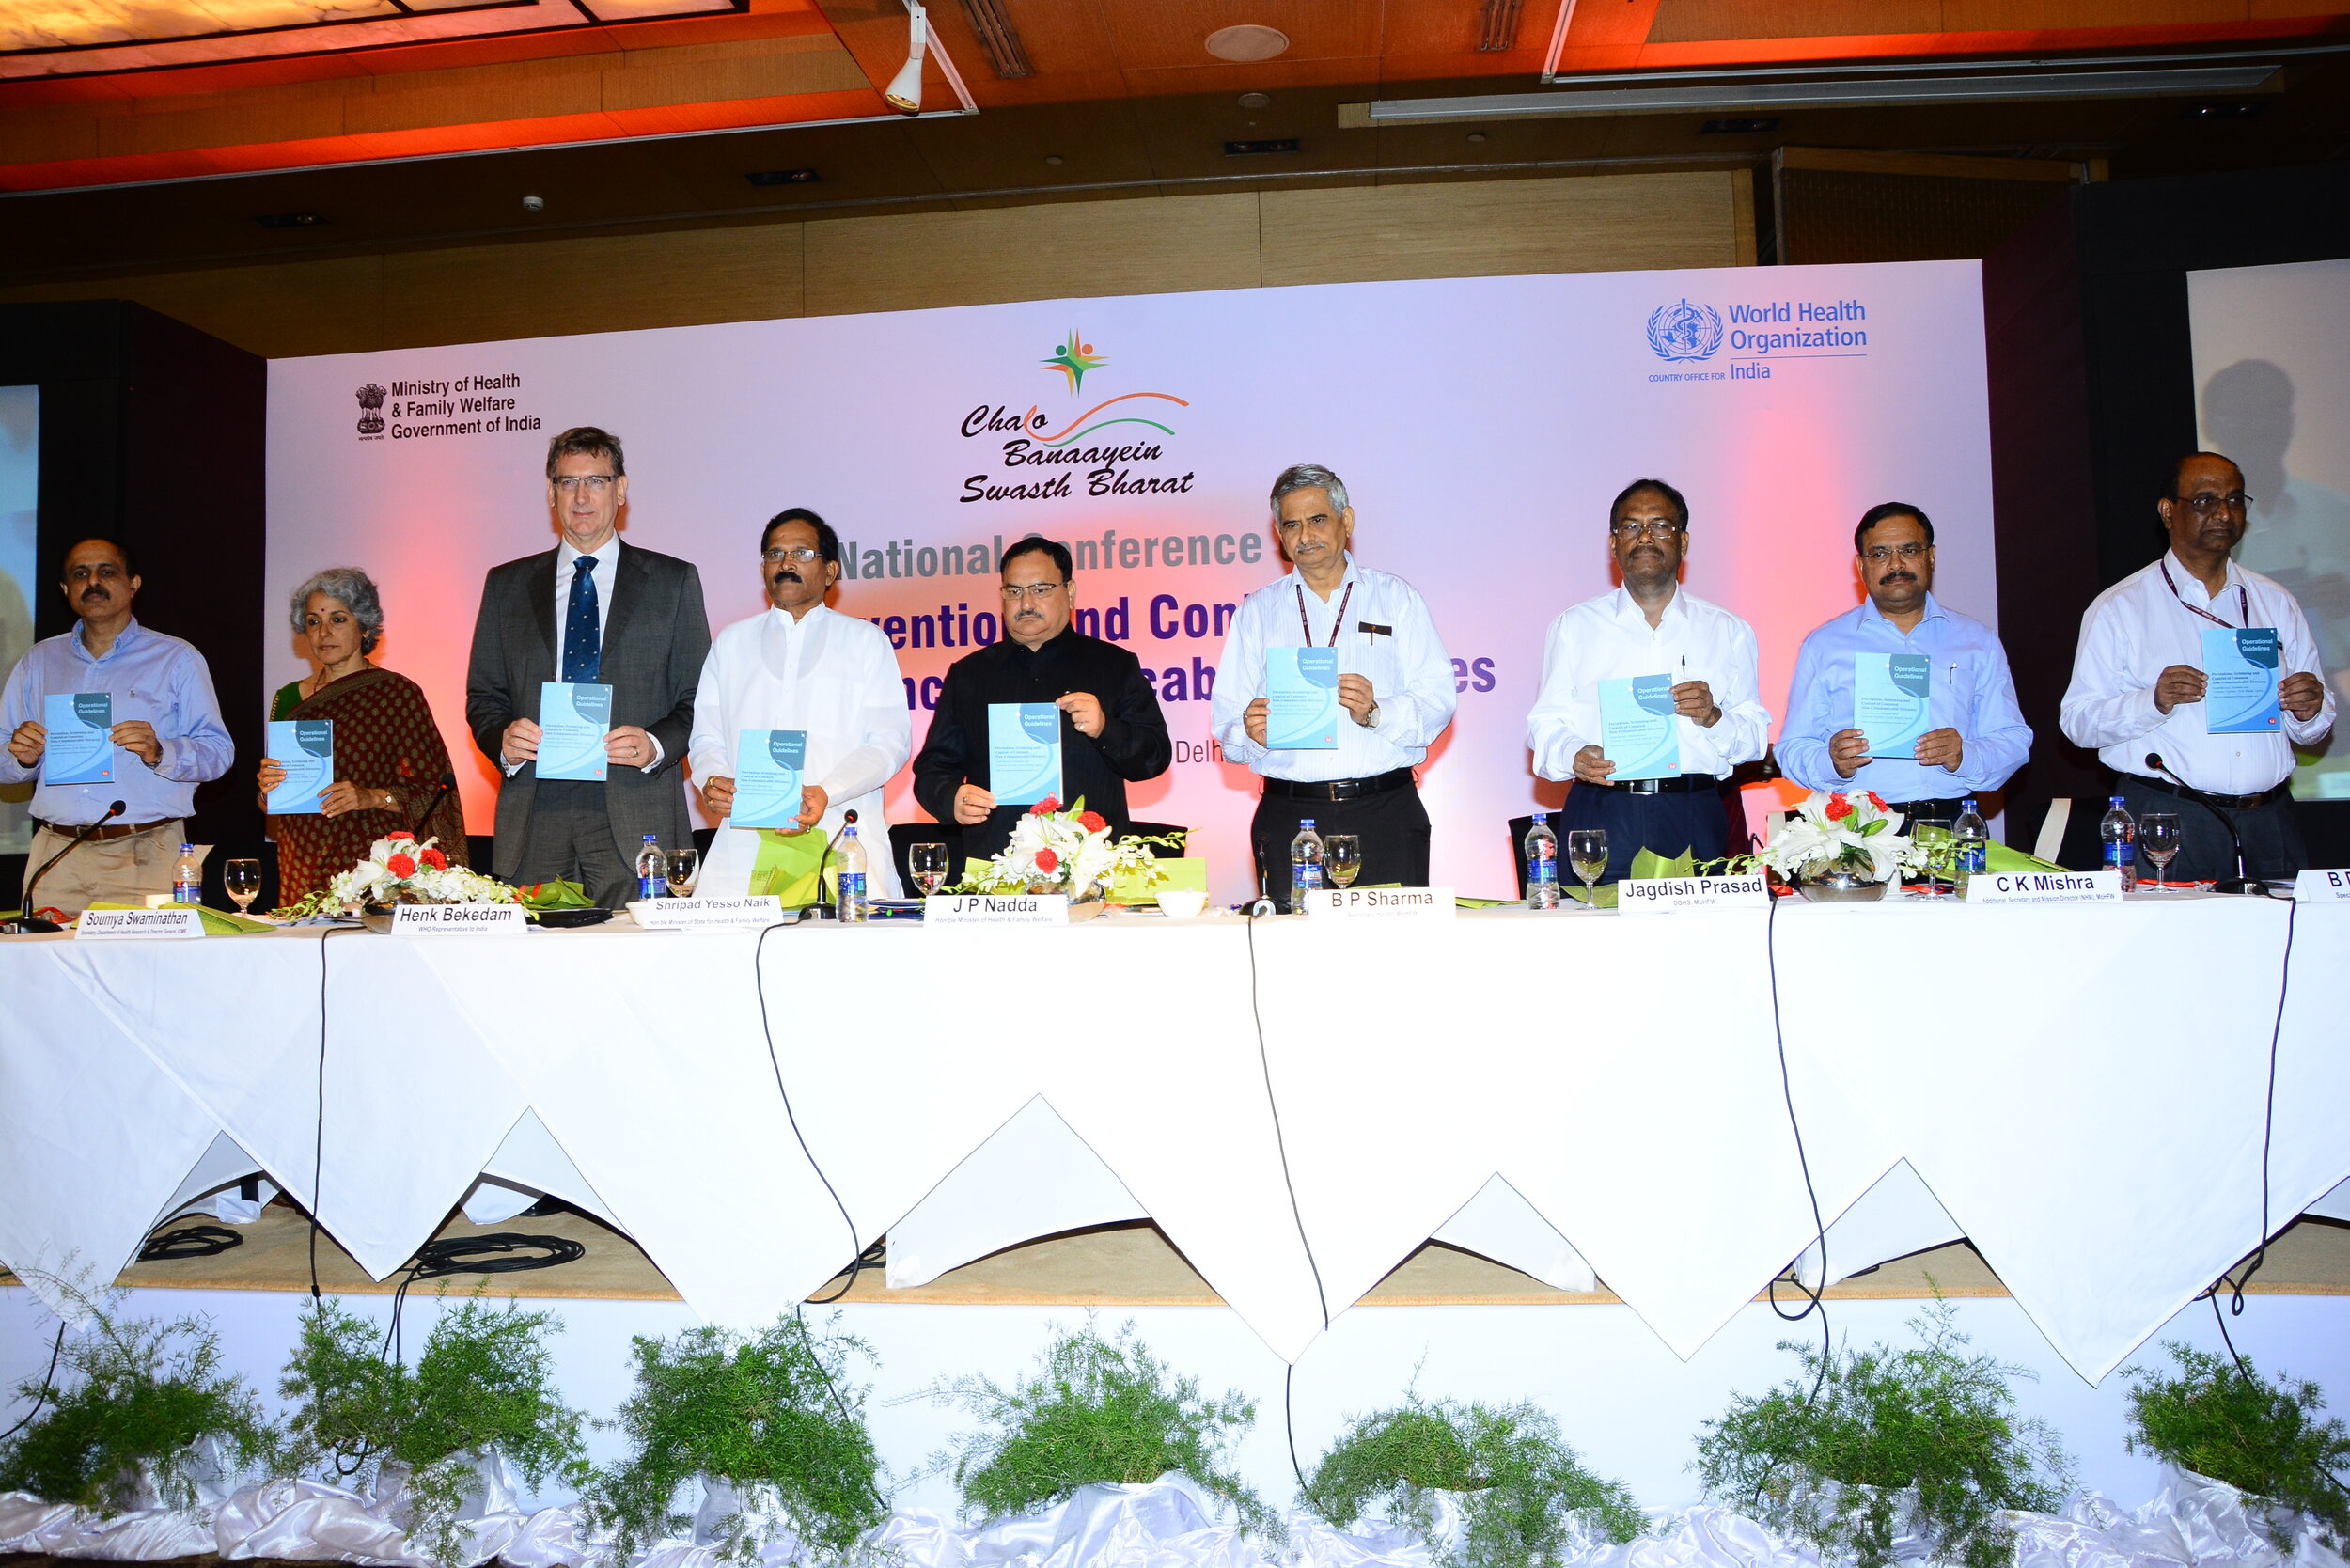 National Conference on Prevention &amp; Control of Major Non-Communicable Diseases in India - Conferences, Meetings &amp; Workshops